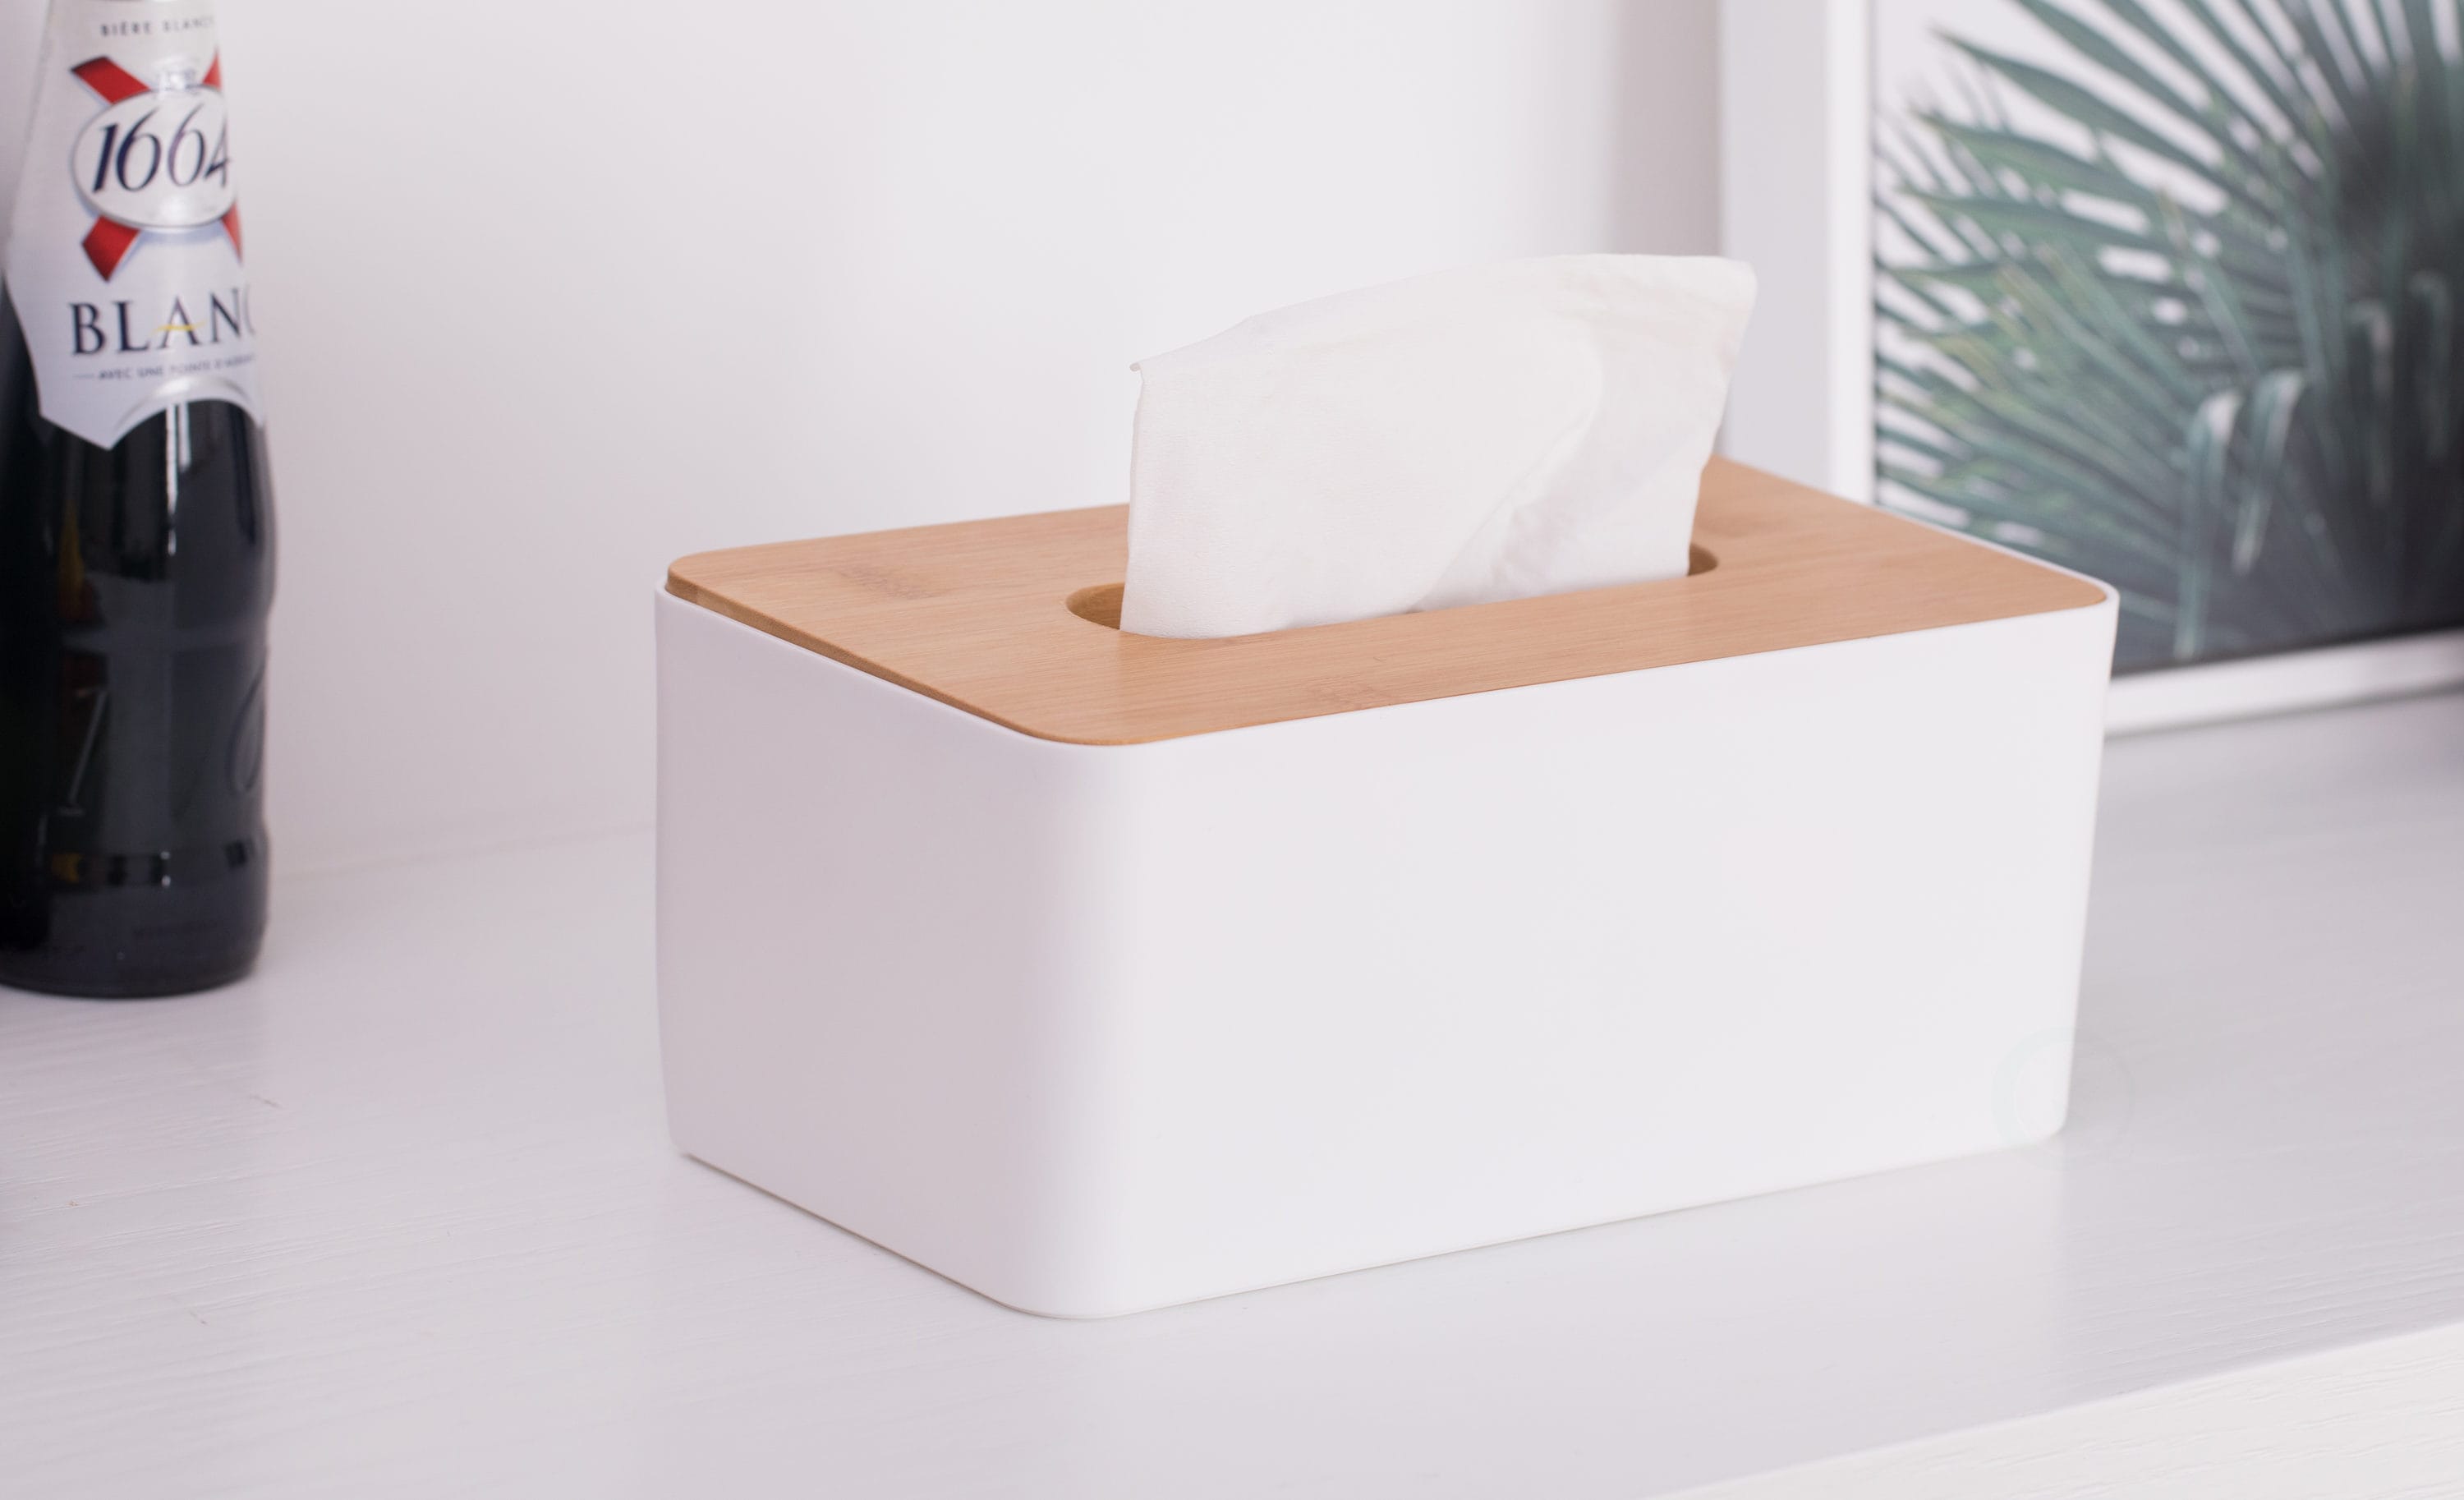 Details about   Bamboo Tissue Box Holder Storage Paper Box Tissue Box Cover Car Wood Napkins Hol 